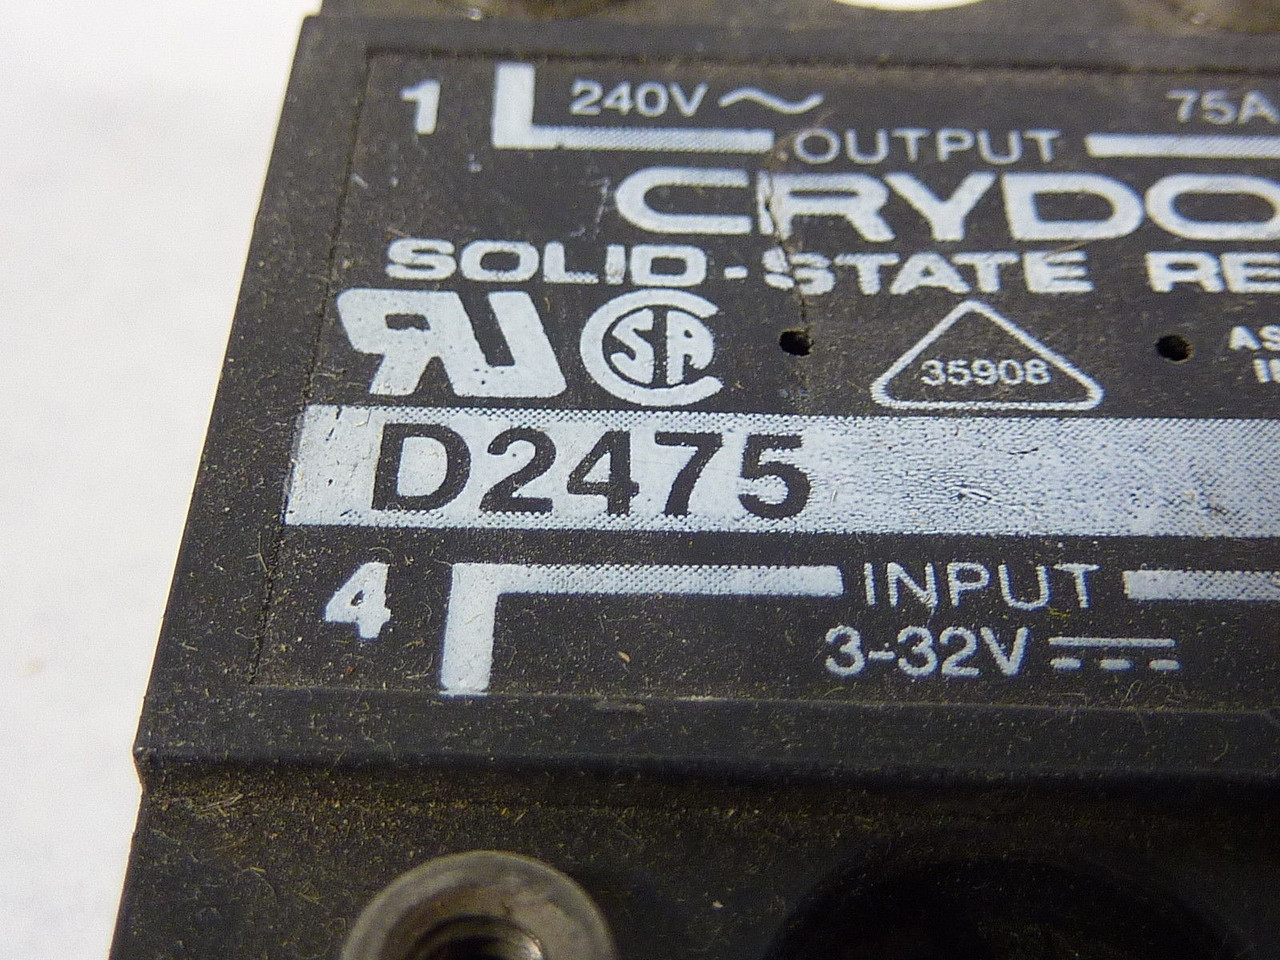 Crydom D2475 Solid State Relay 32VDC 280VAC 75A USED